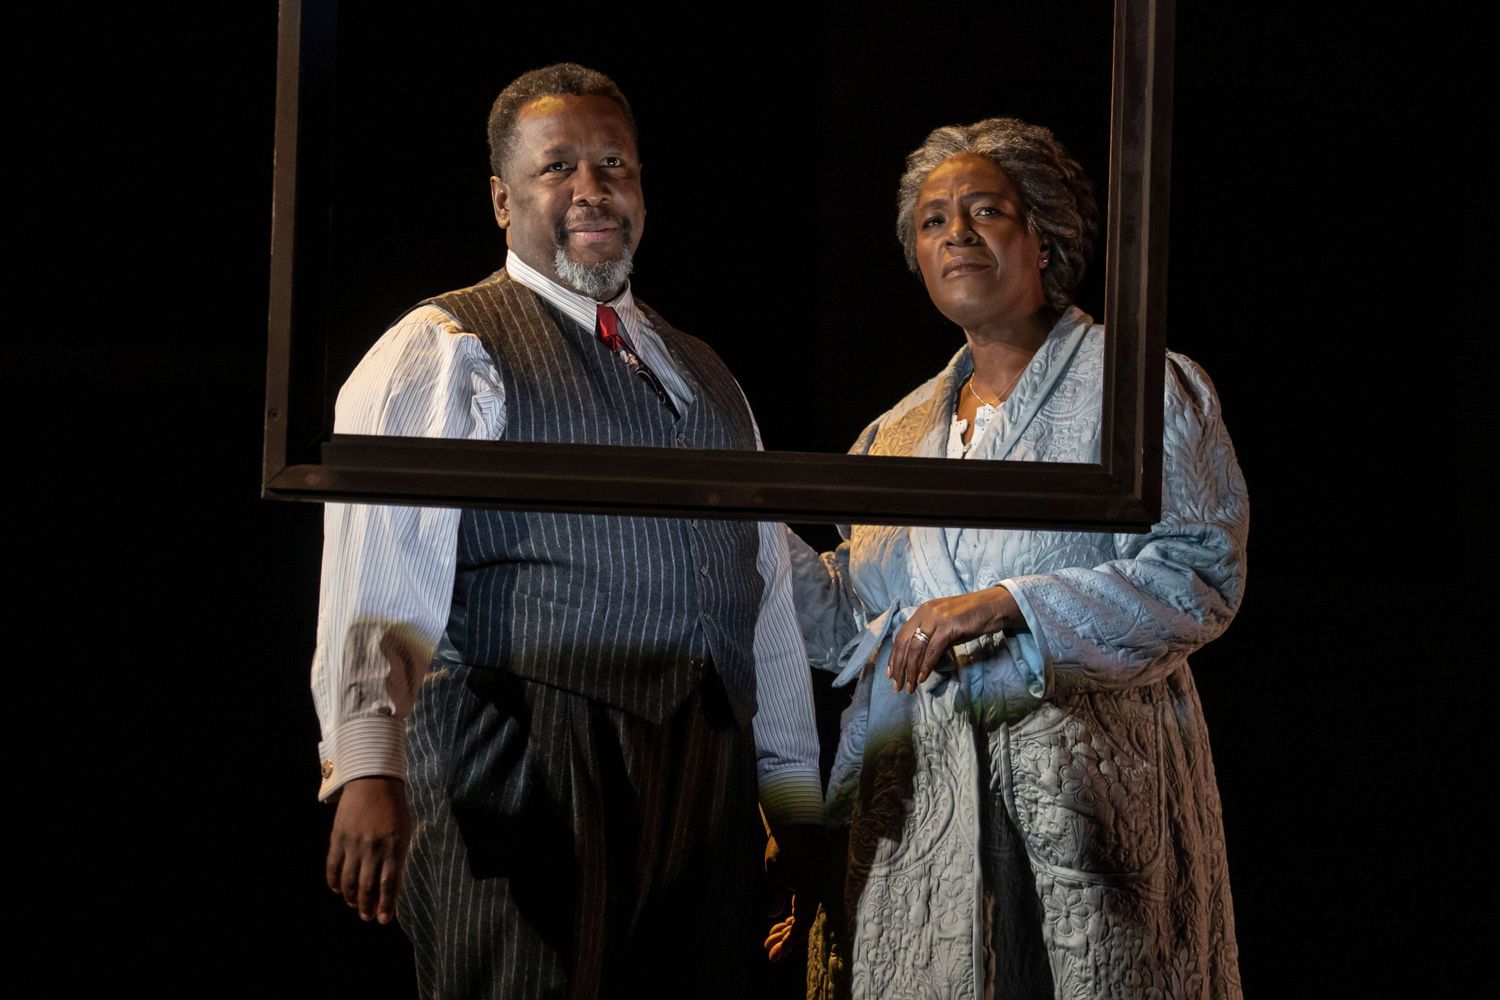 Death of a Salesman. Photo by Joan Marcus. Olivier Award nominee Wendell Pierce and Olivier Award winner and 2022 Tony Award® nominee Sharon D Clarke reprise their roles as Willy and Linda Loman, and they are joined by Khris Davis as Biff, McKinley Belcher III as Happy, and Tony Award® winner André De Shields as Willy’s brother, Ben. Additional cast includes Blake DeLong as Howard/Stanley, Lynn Hawley as The Woman/Jenny, Grace Porter as Letta/Jazz Singer, Stephen Stocking as Bernard, Chelsea Lee Williams as Miss Forsythe, and The Wire’s Delaney Williams as Charley.